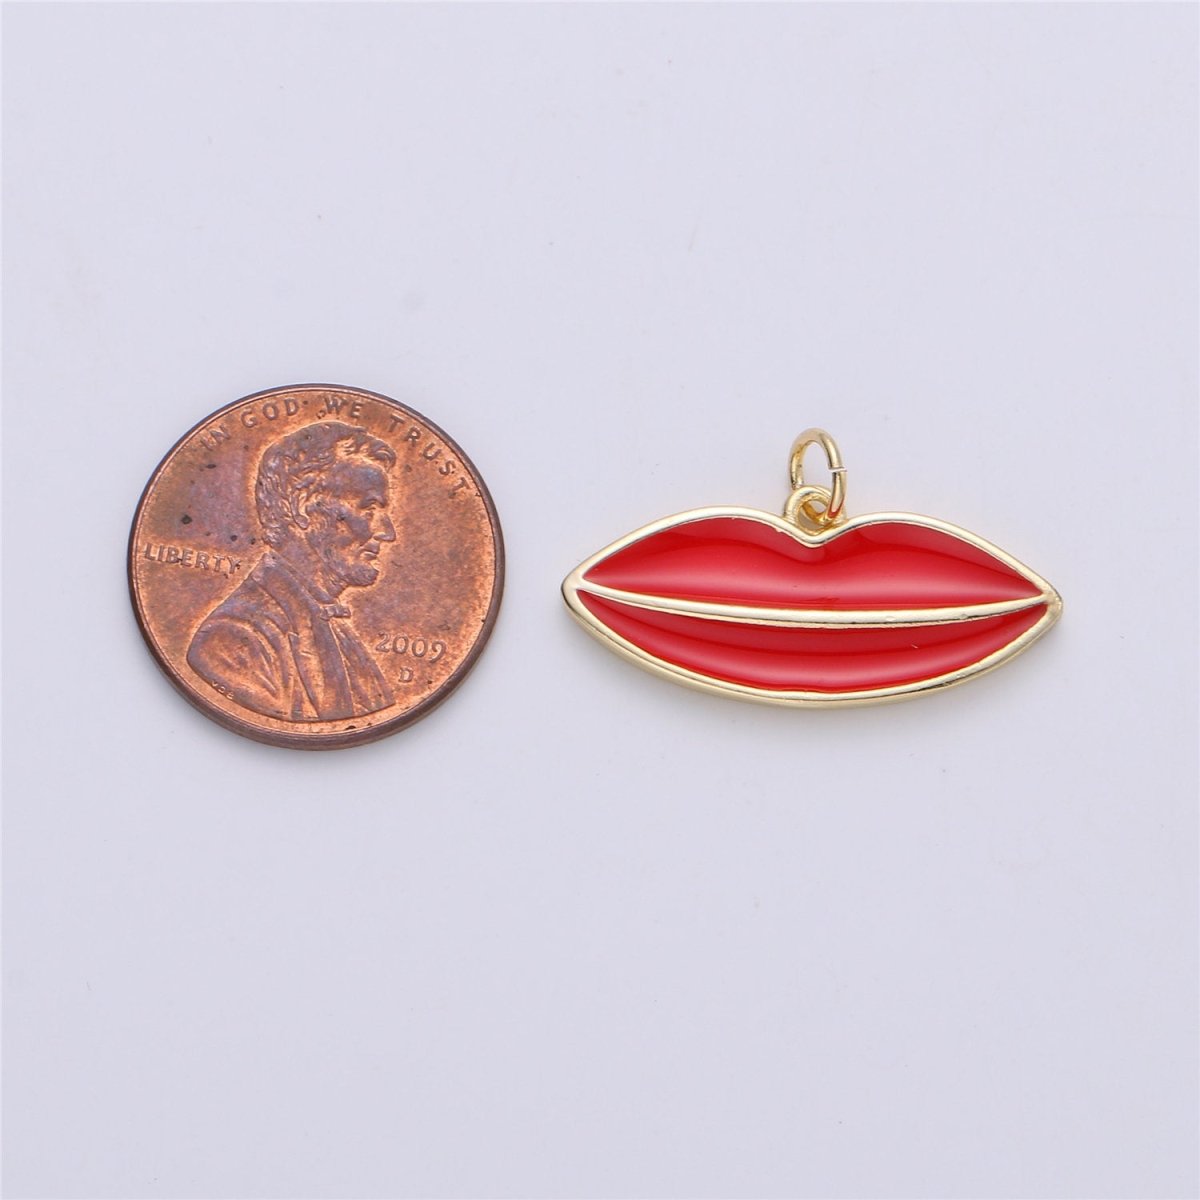 Dainty Red Enamel Lips charm, 25mmx15mm, Gold lips charm, Lips Charm, 14K Gold Plated for Bracelet Necklace Earring Charm C-723 - DLUXCA